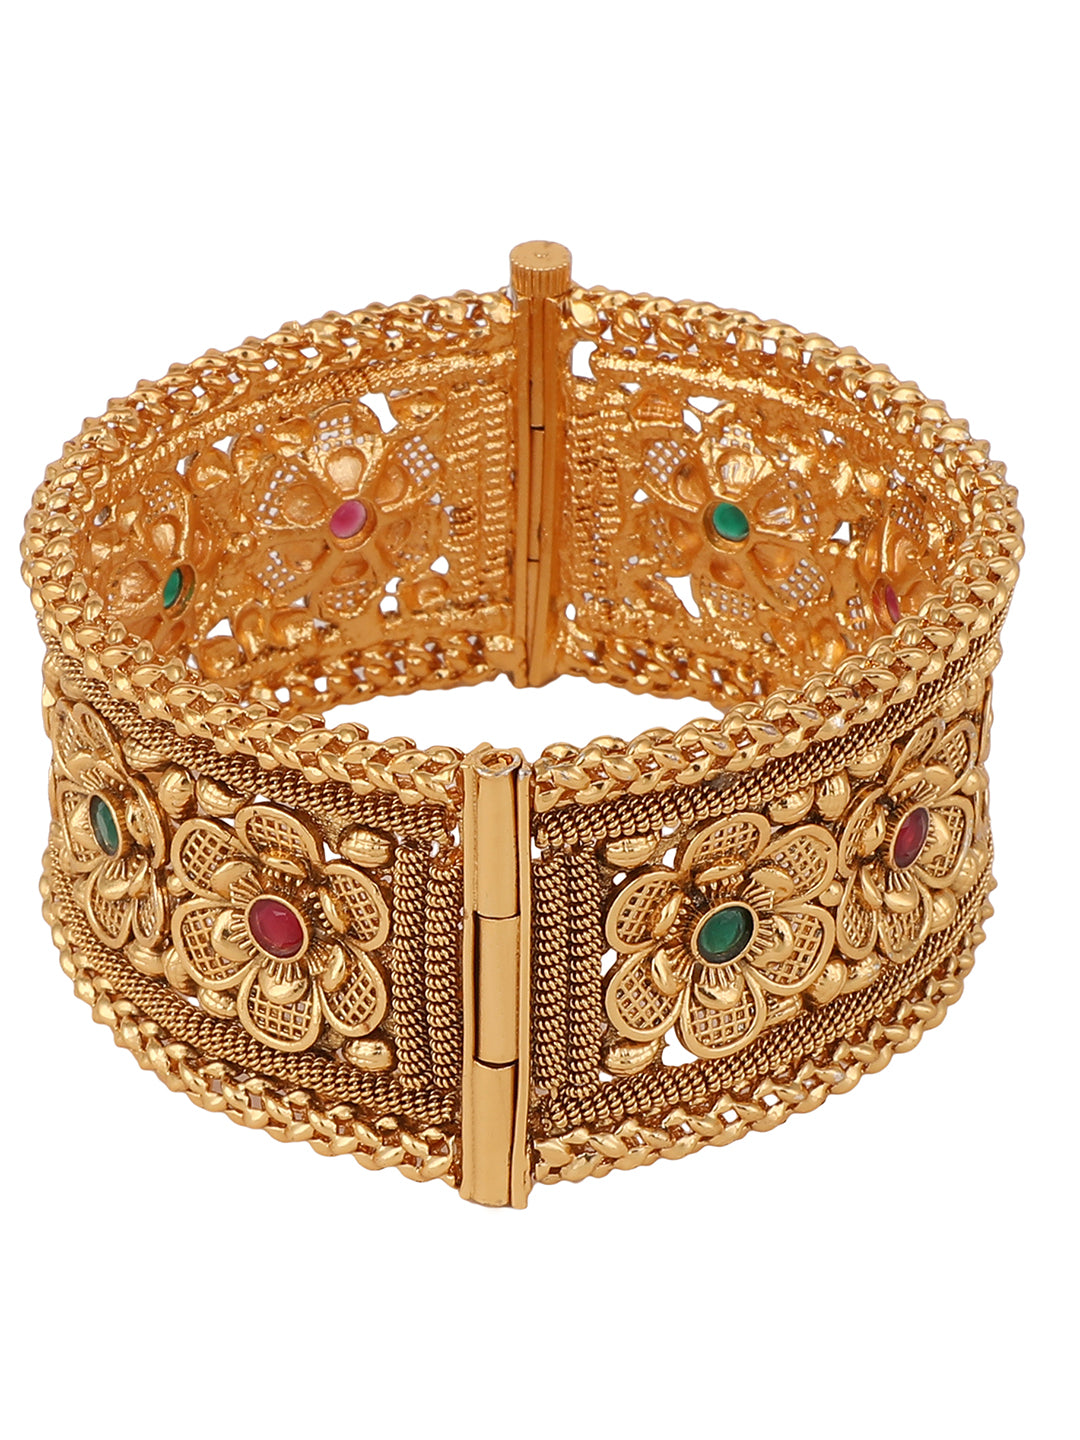 Women's Gold & Pink 24Ct Stone-Studded & Beaded Hand Crafted Bangle - Anikas Creation